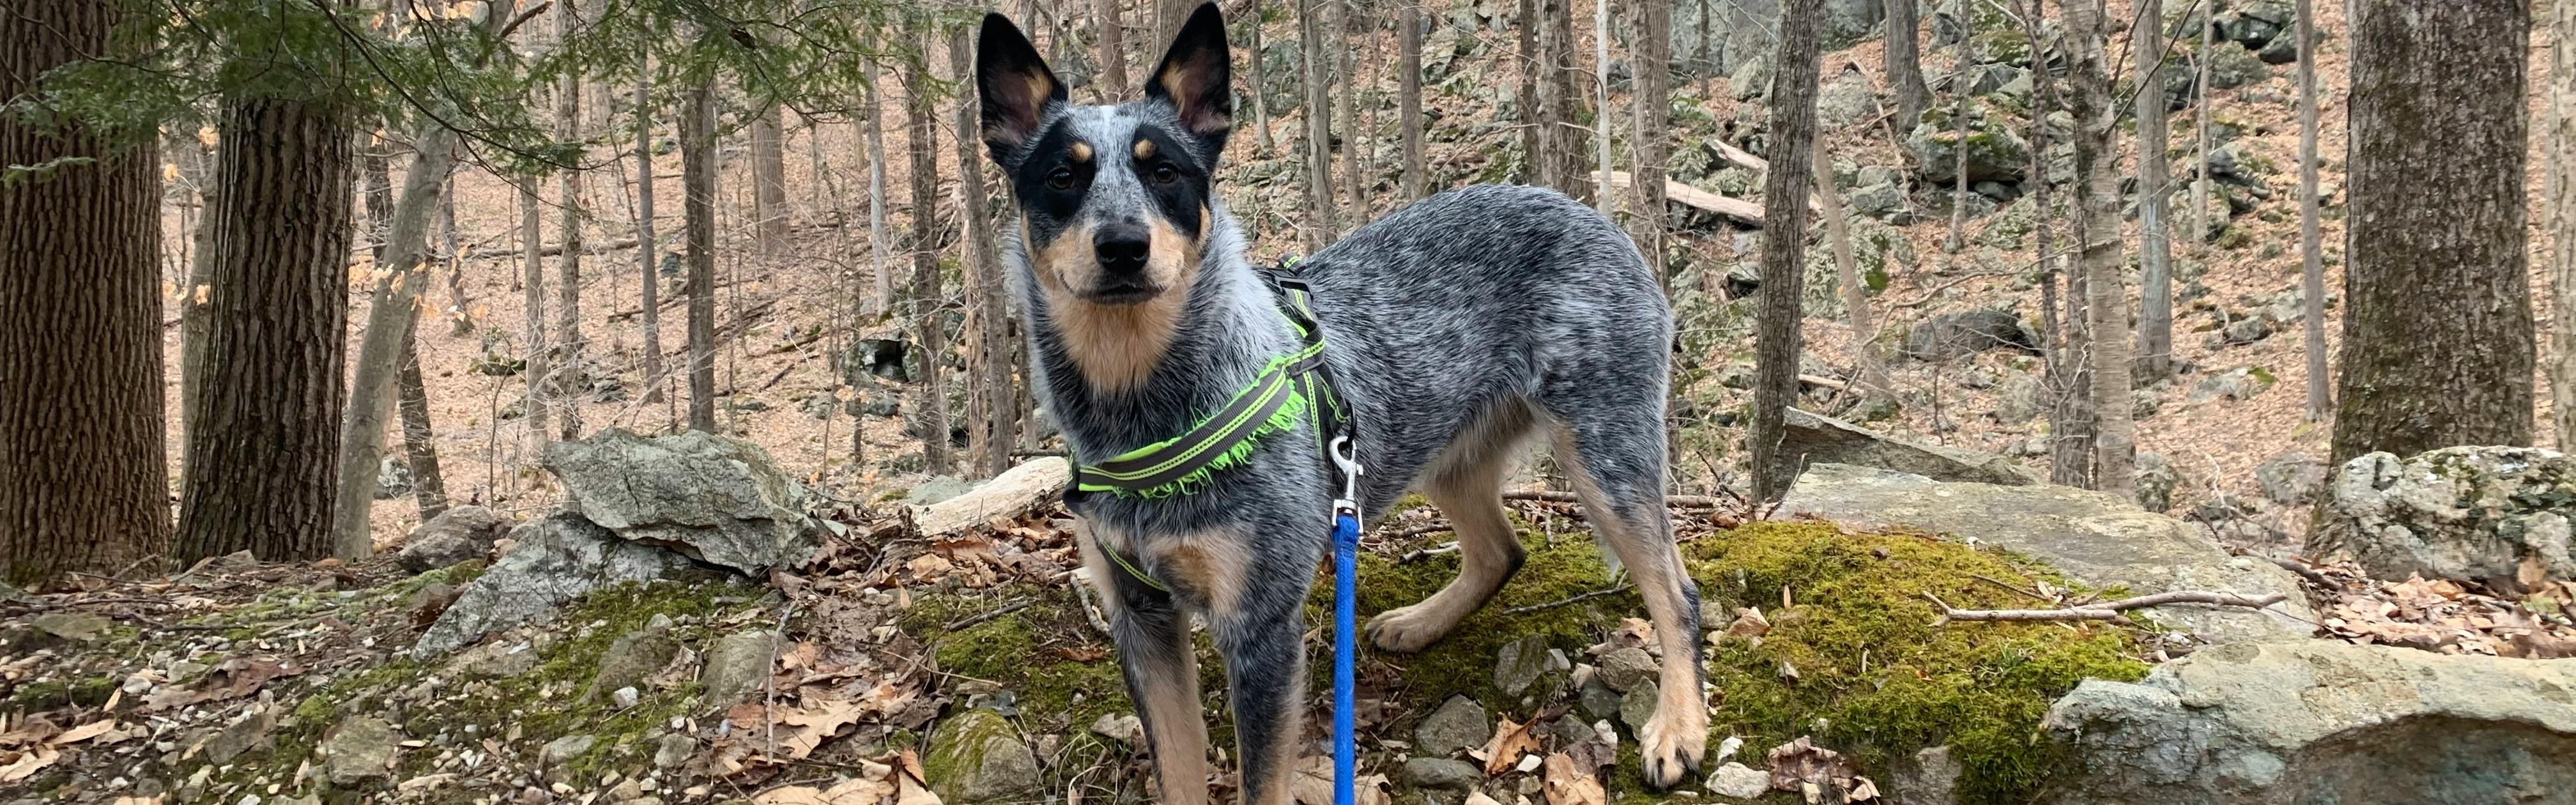 An Australian cattle dog stands on a pile of rocks in a wooded area